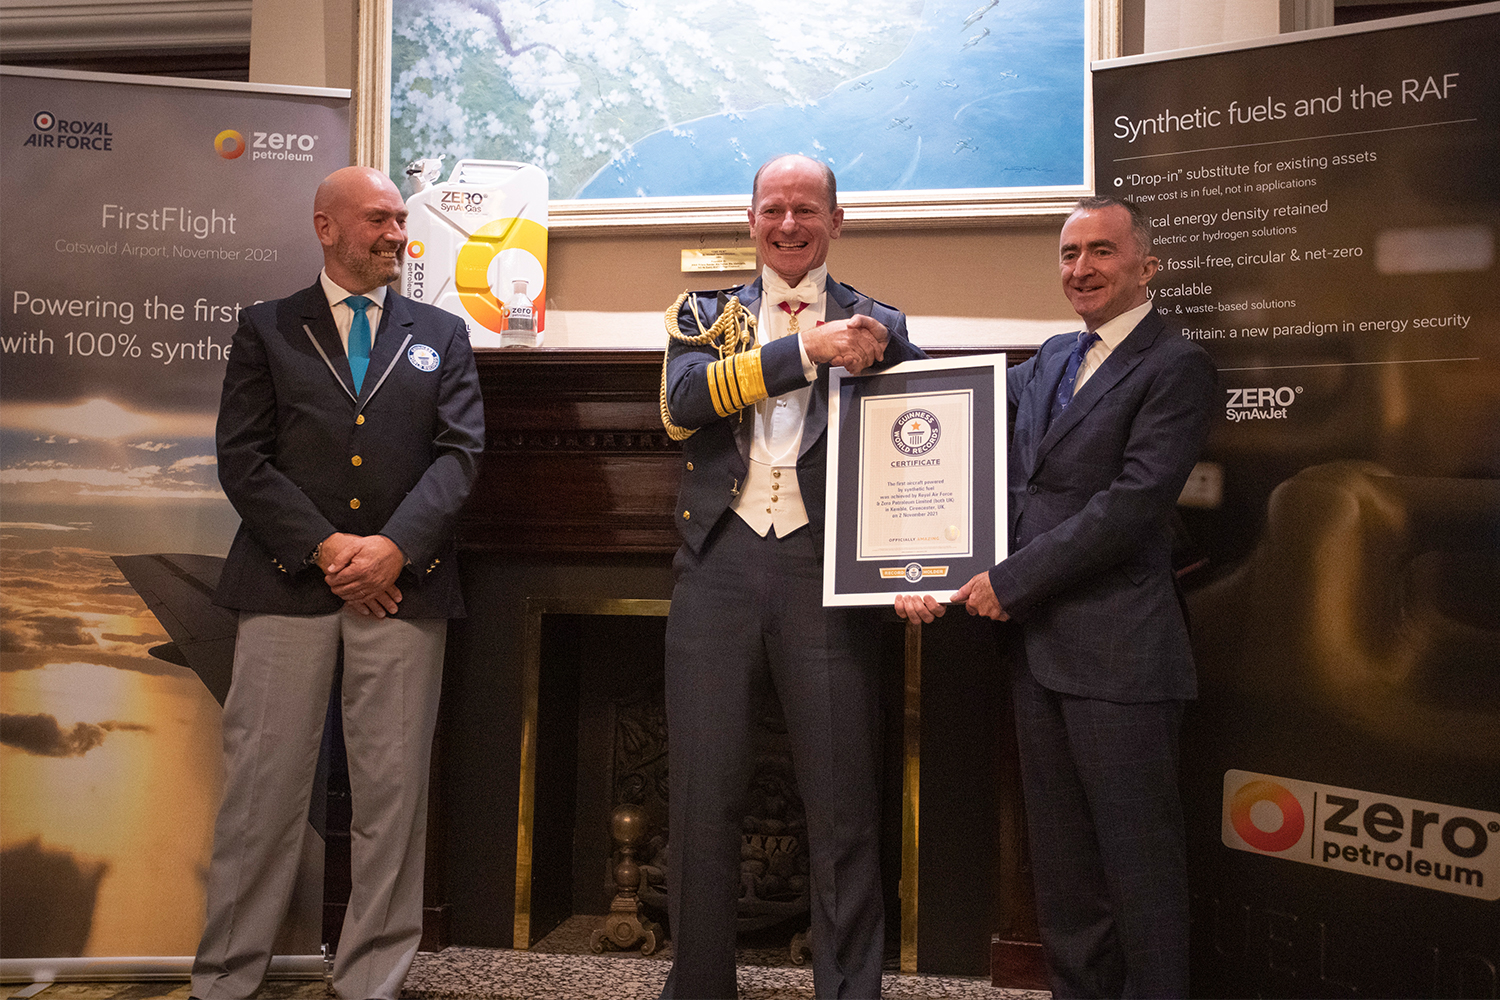 Paddy Lowe, right, receiving the Guinness World Record for the first aircraft powered by synthetic fuel, which was awarded to both Zero Petroleum and the Royal Air Force